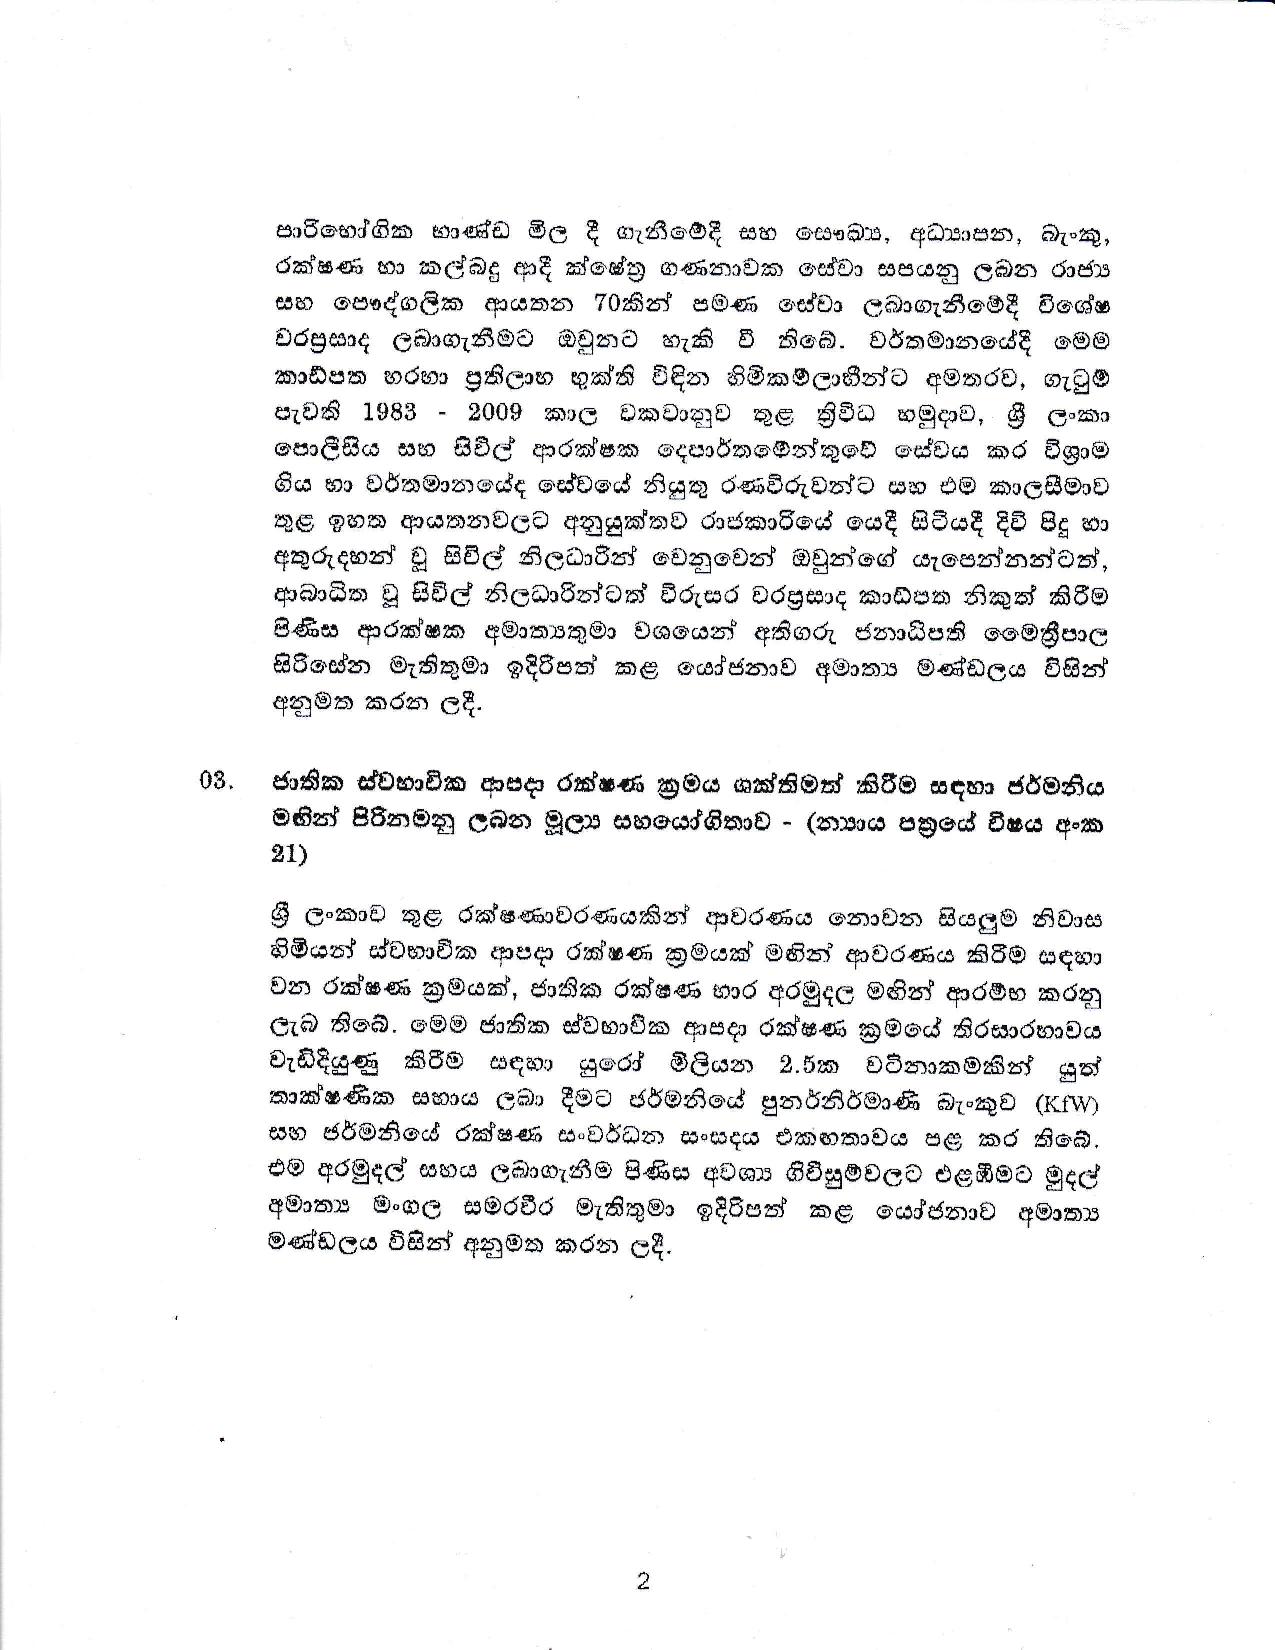 Cabinet Decision on 21.05.2019 page 002